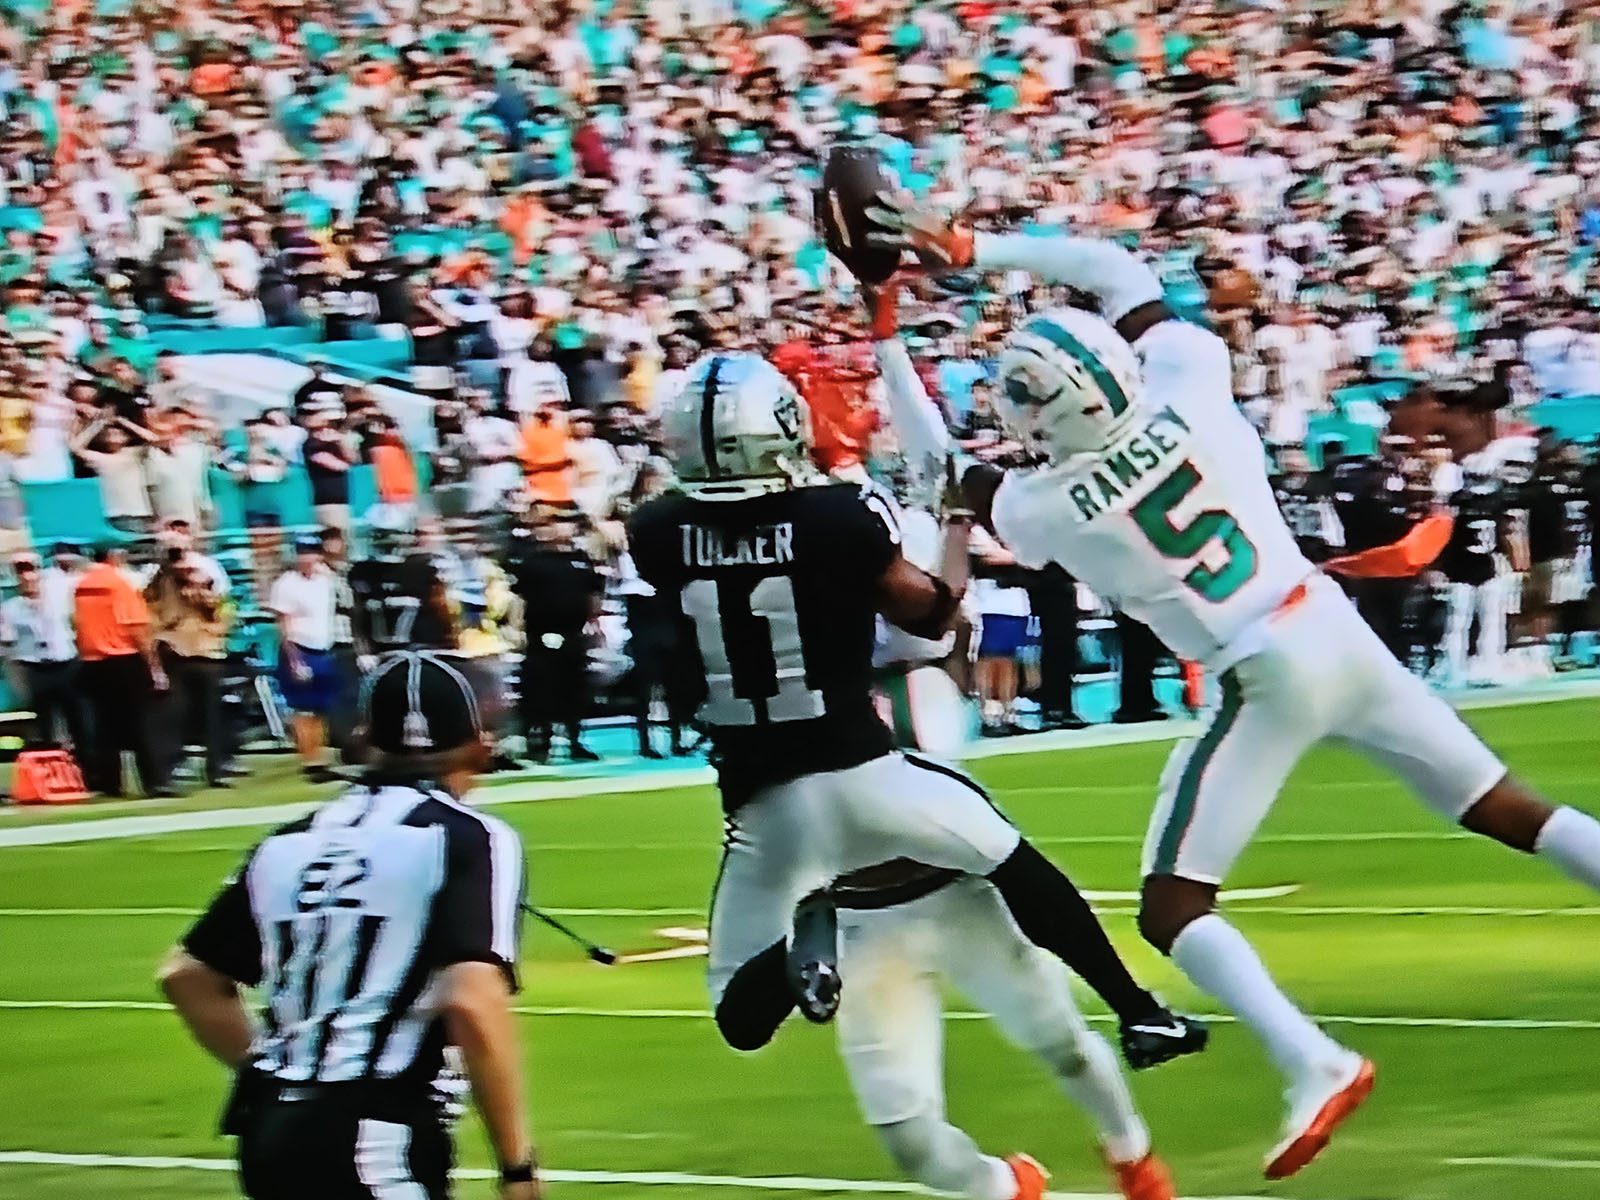 Jalen Ramsey seals the win for the Dolphins with a leaping interception, his second of the game.